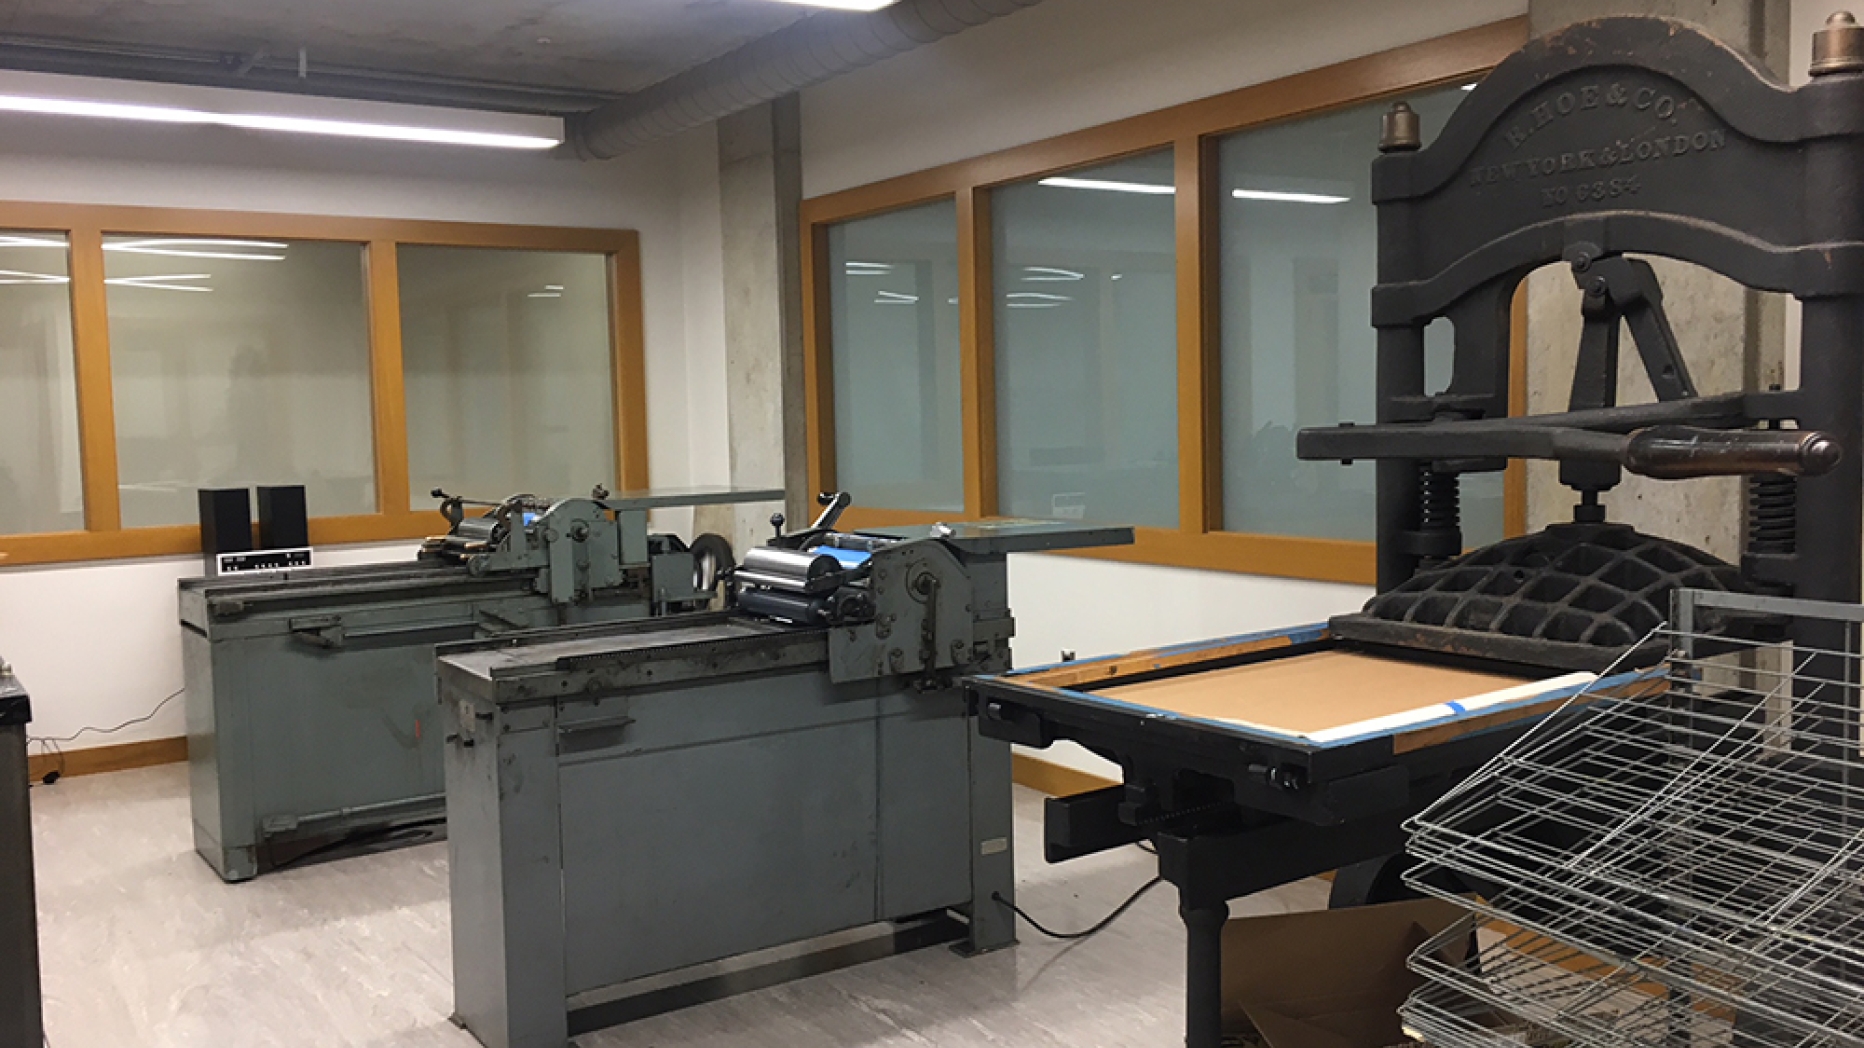 Studio with various kinds of printing presses